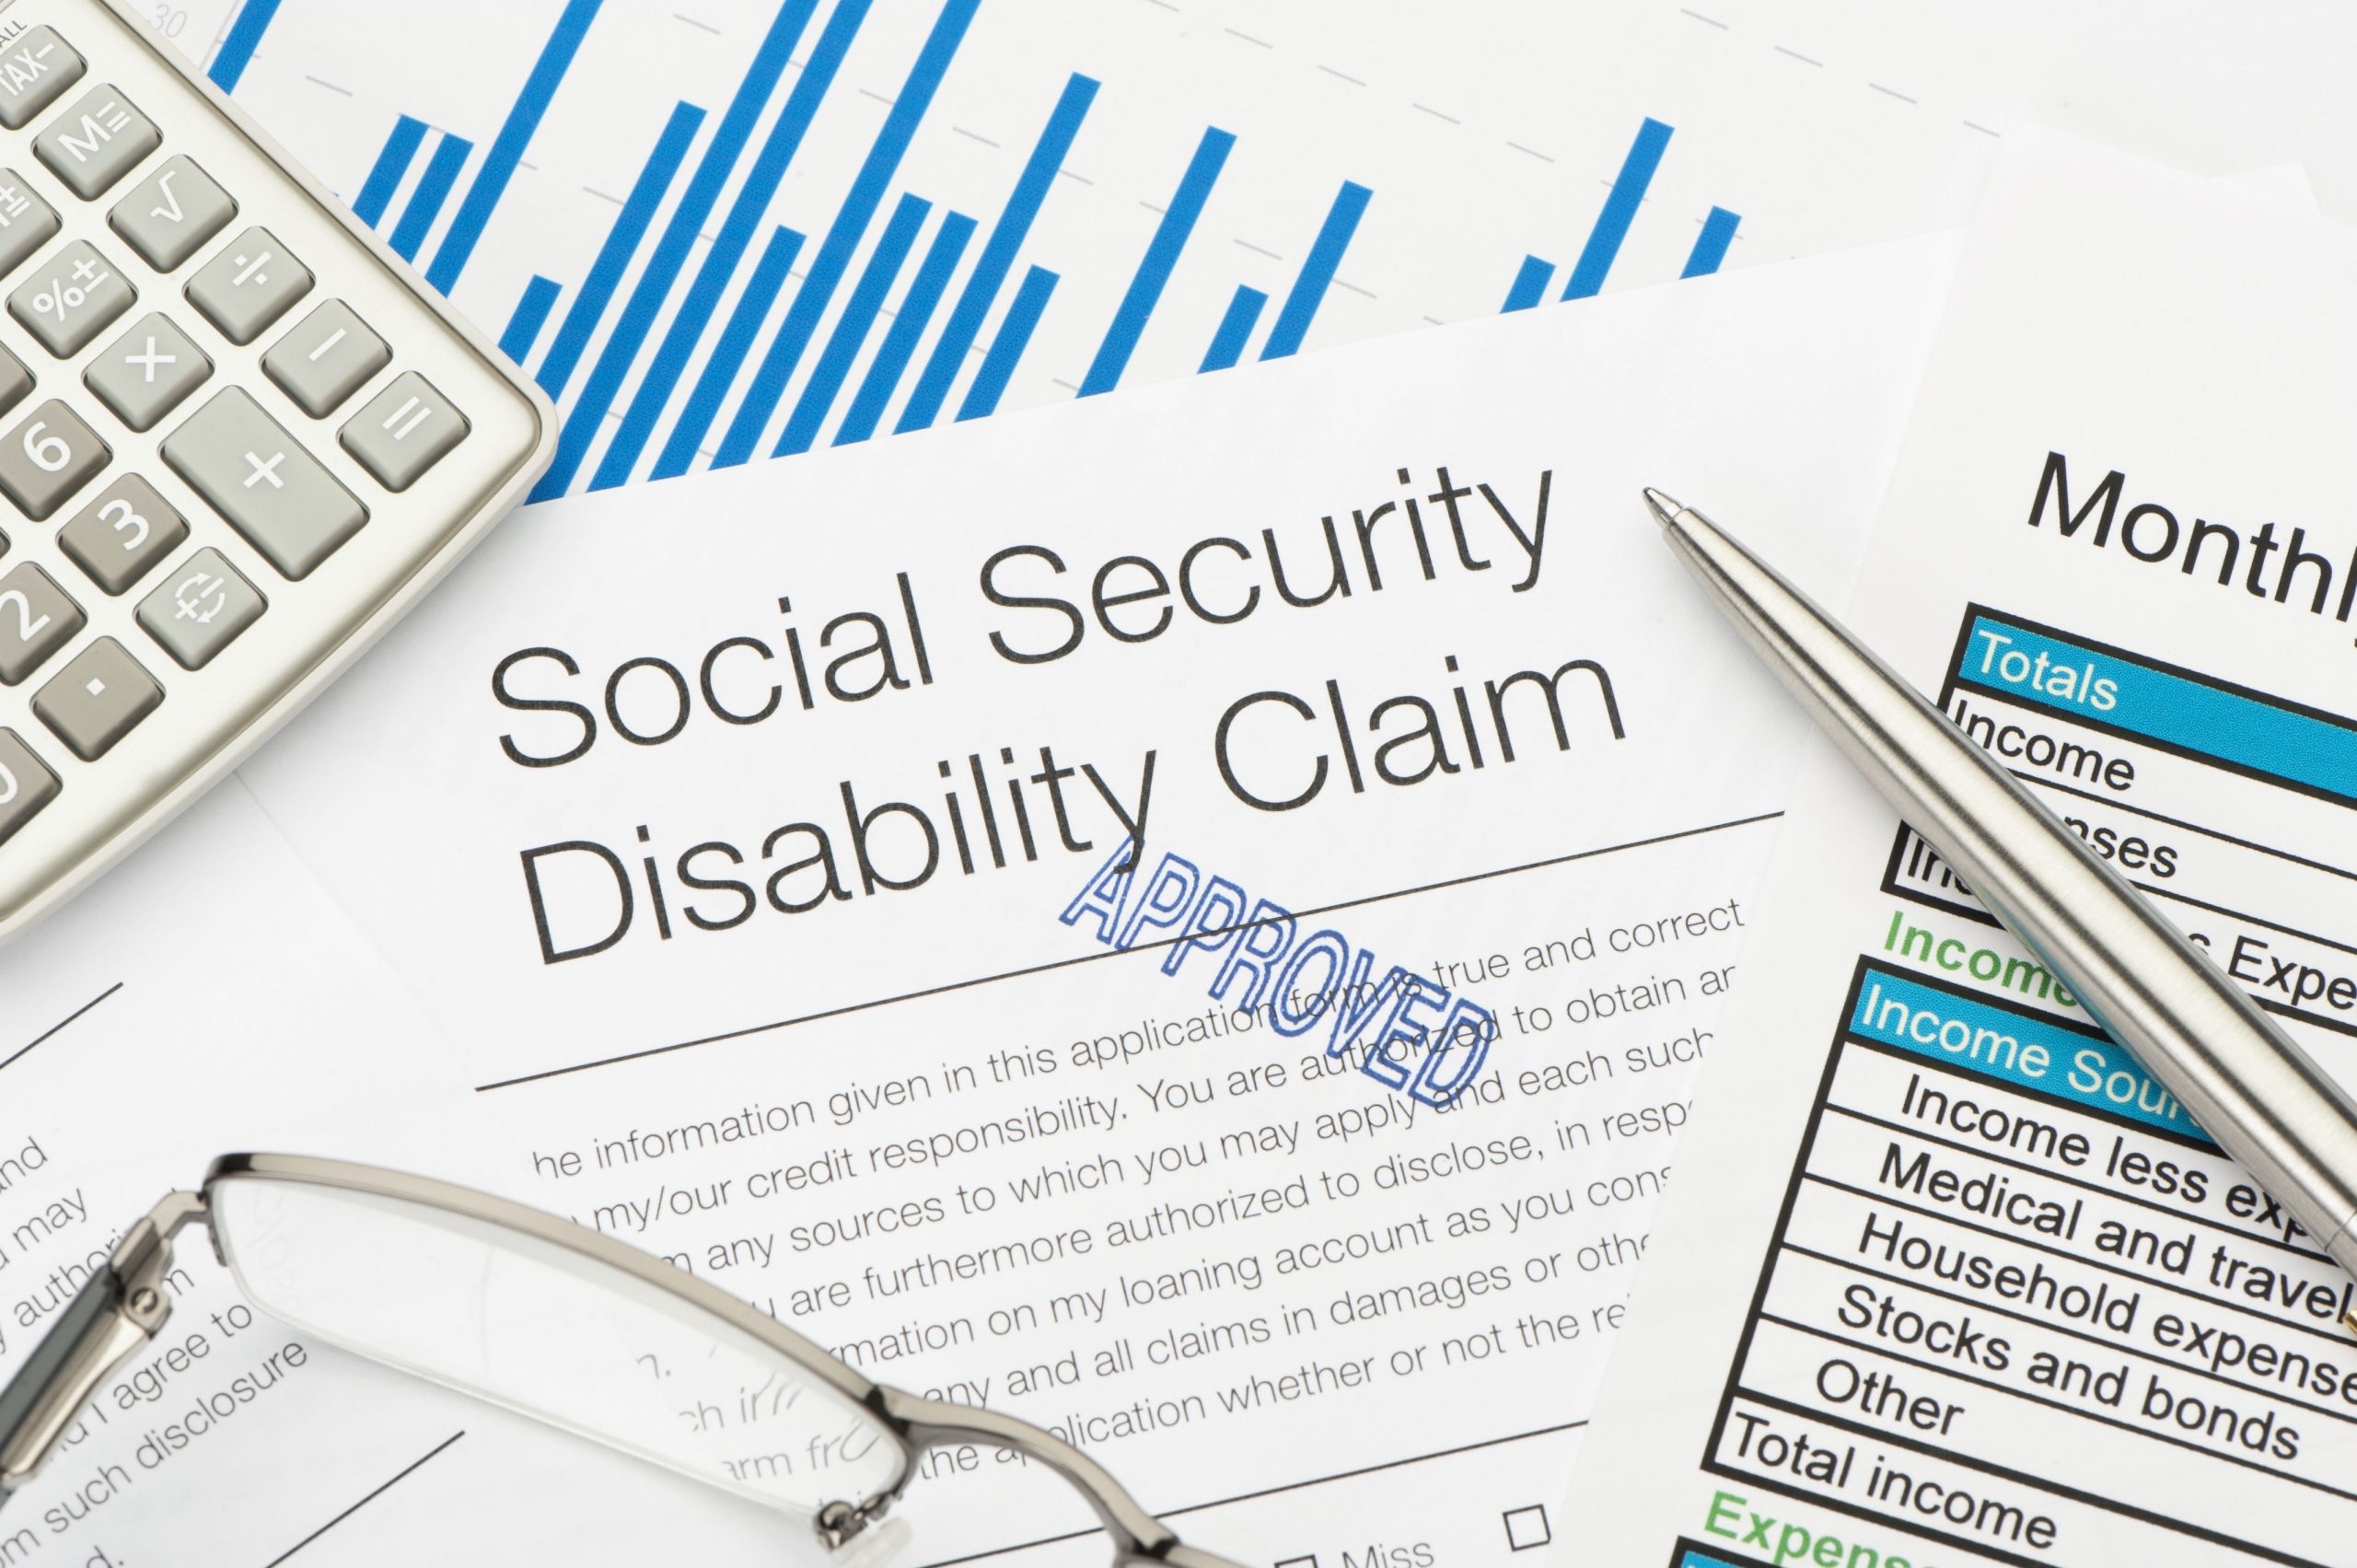 Social Security Disability Insurance Determination